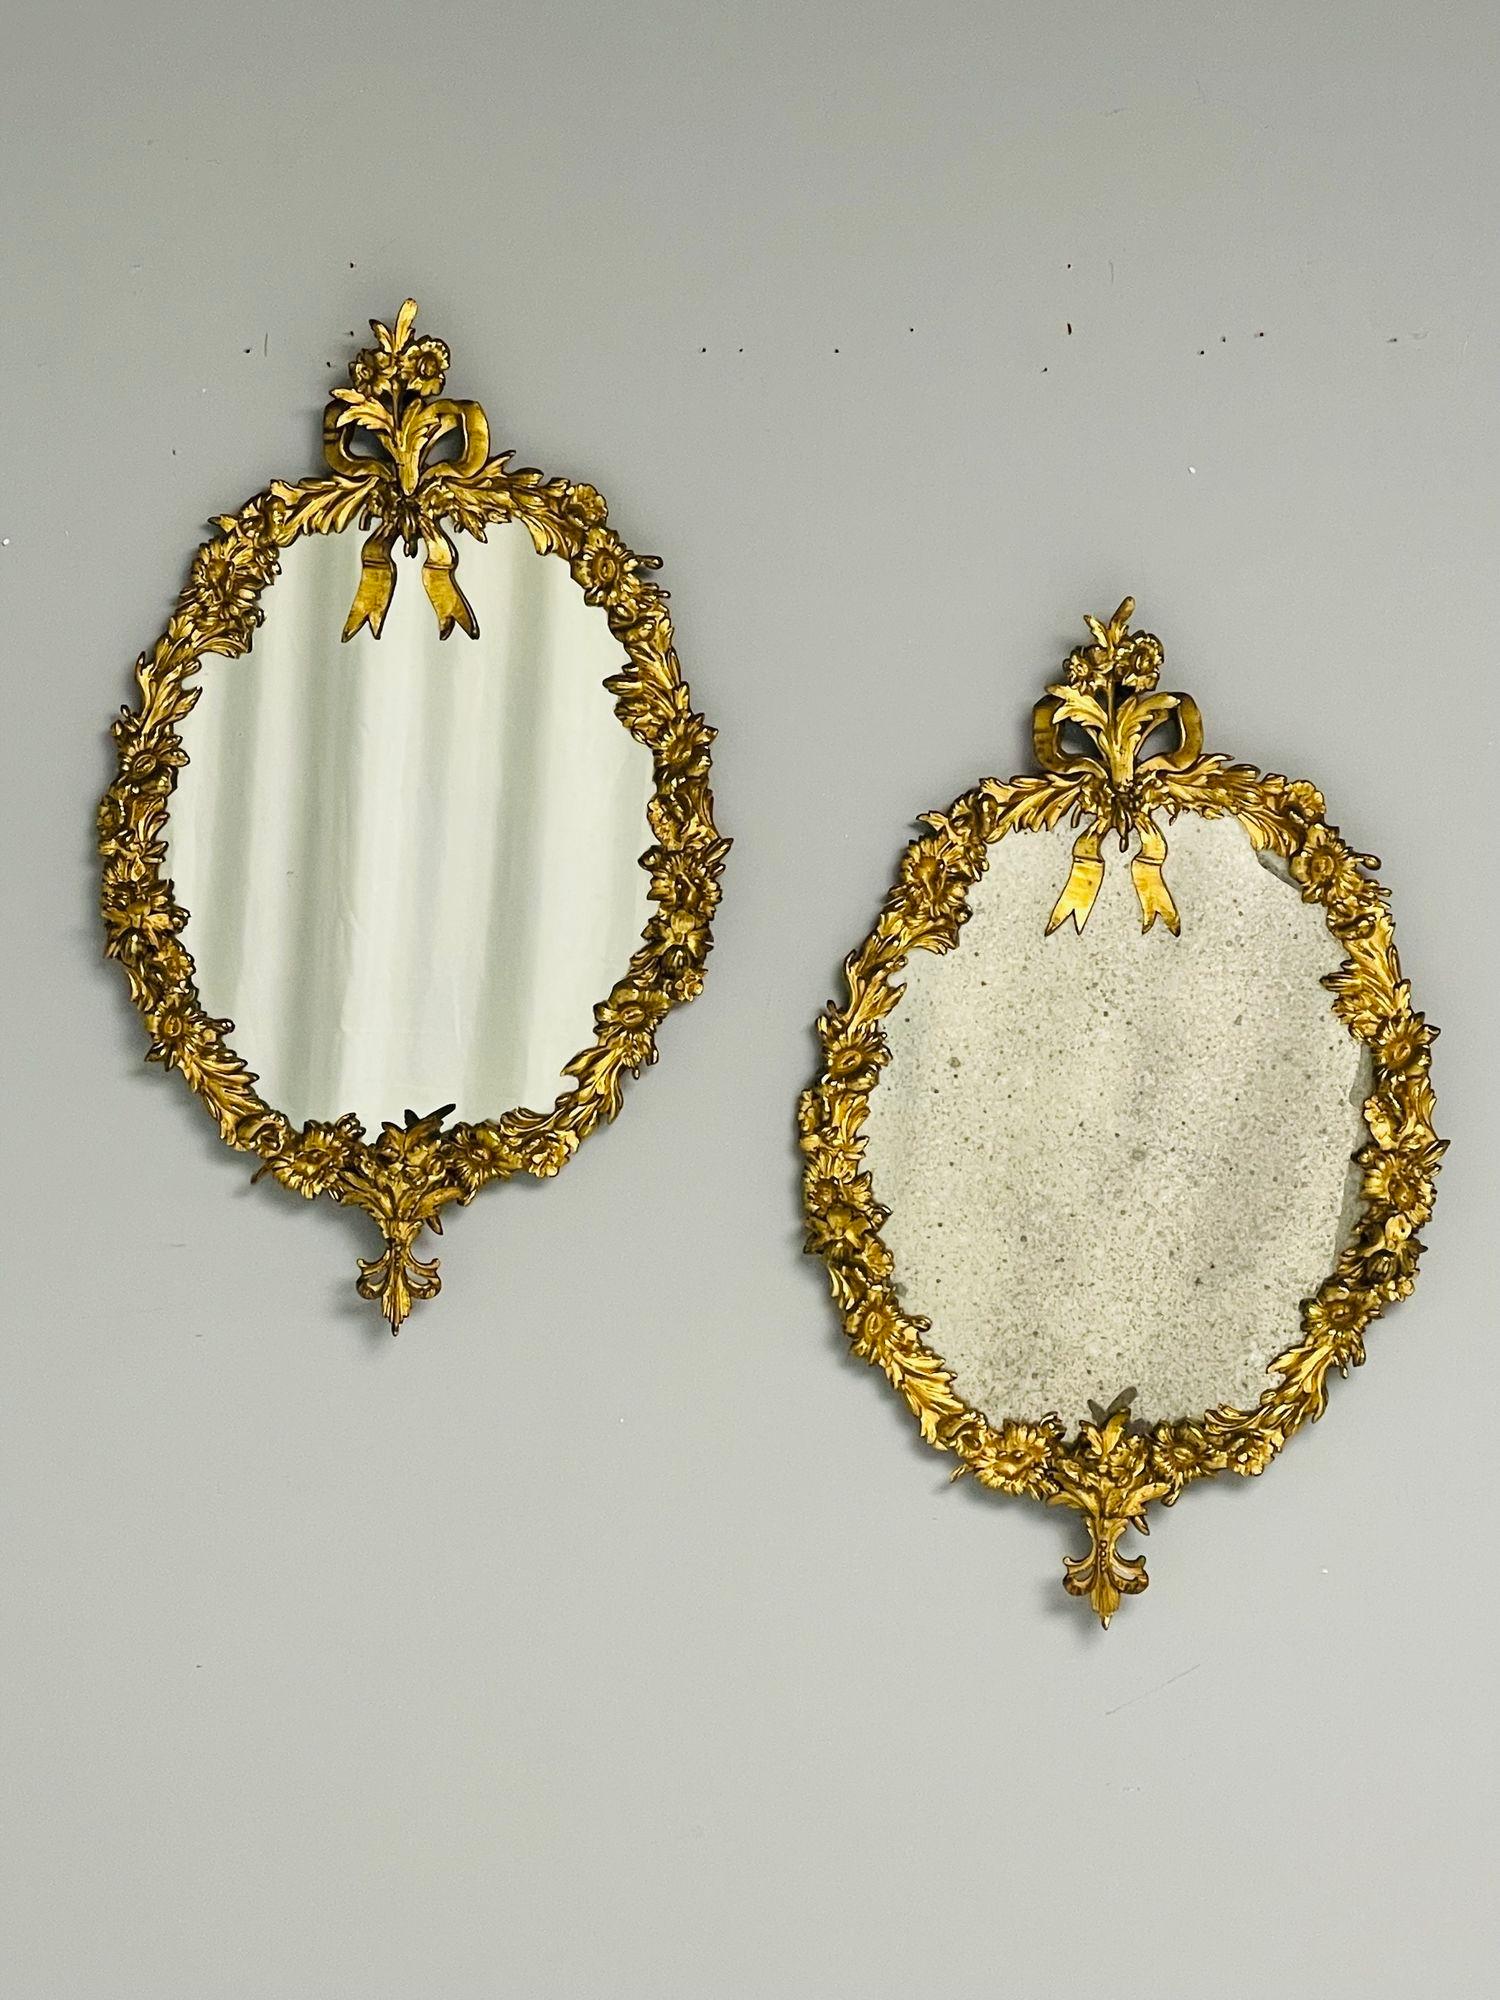 Louis XVI, Small Oval Mirrors, Bronze, Carved Wood, Floral Motif, France, 19th Century

Chic pair of small oval mirrors each heavily cast in bronze with a floral and foliate motif surmounted by ribbon design. One mirror retains it's original 19th